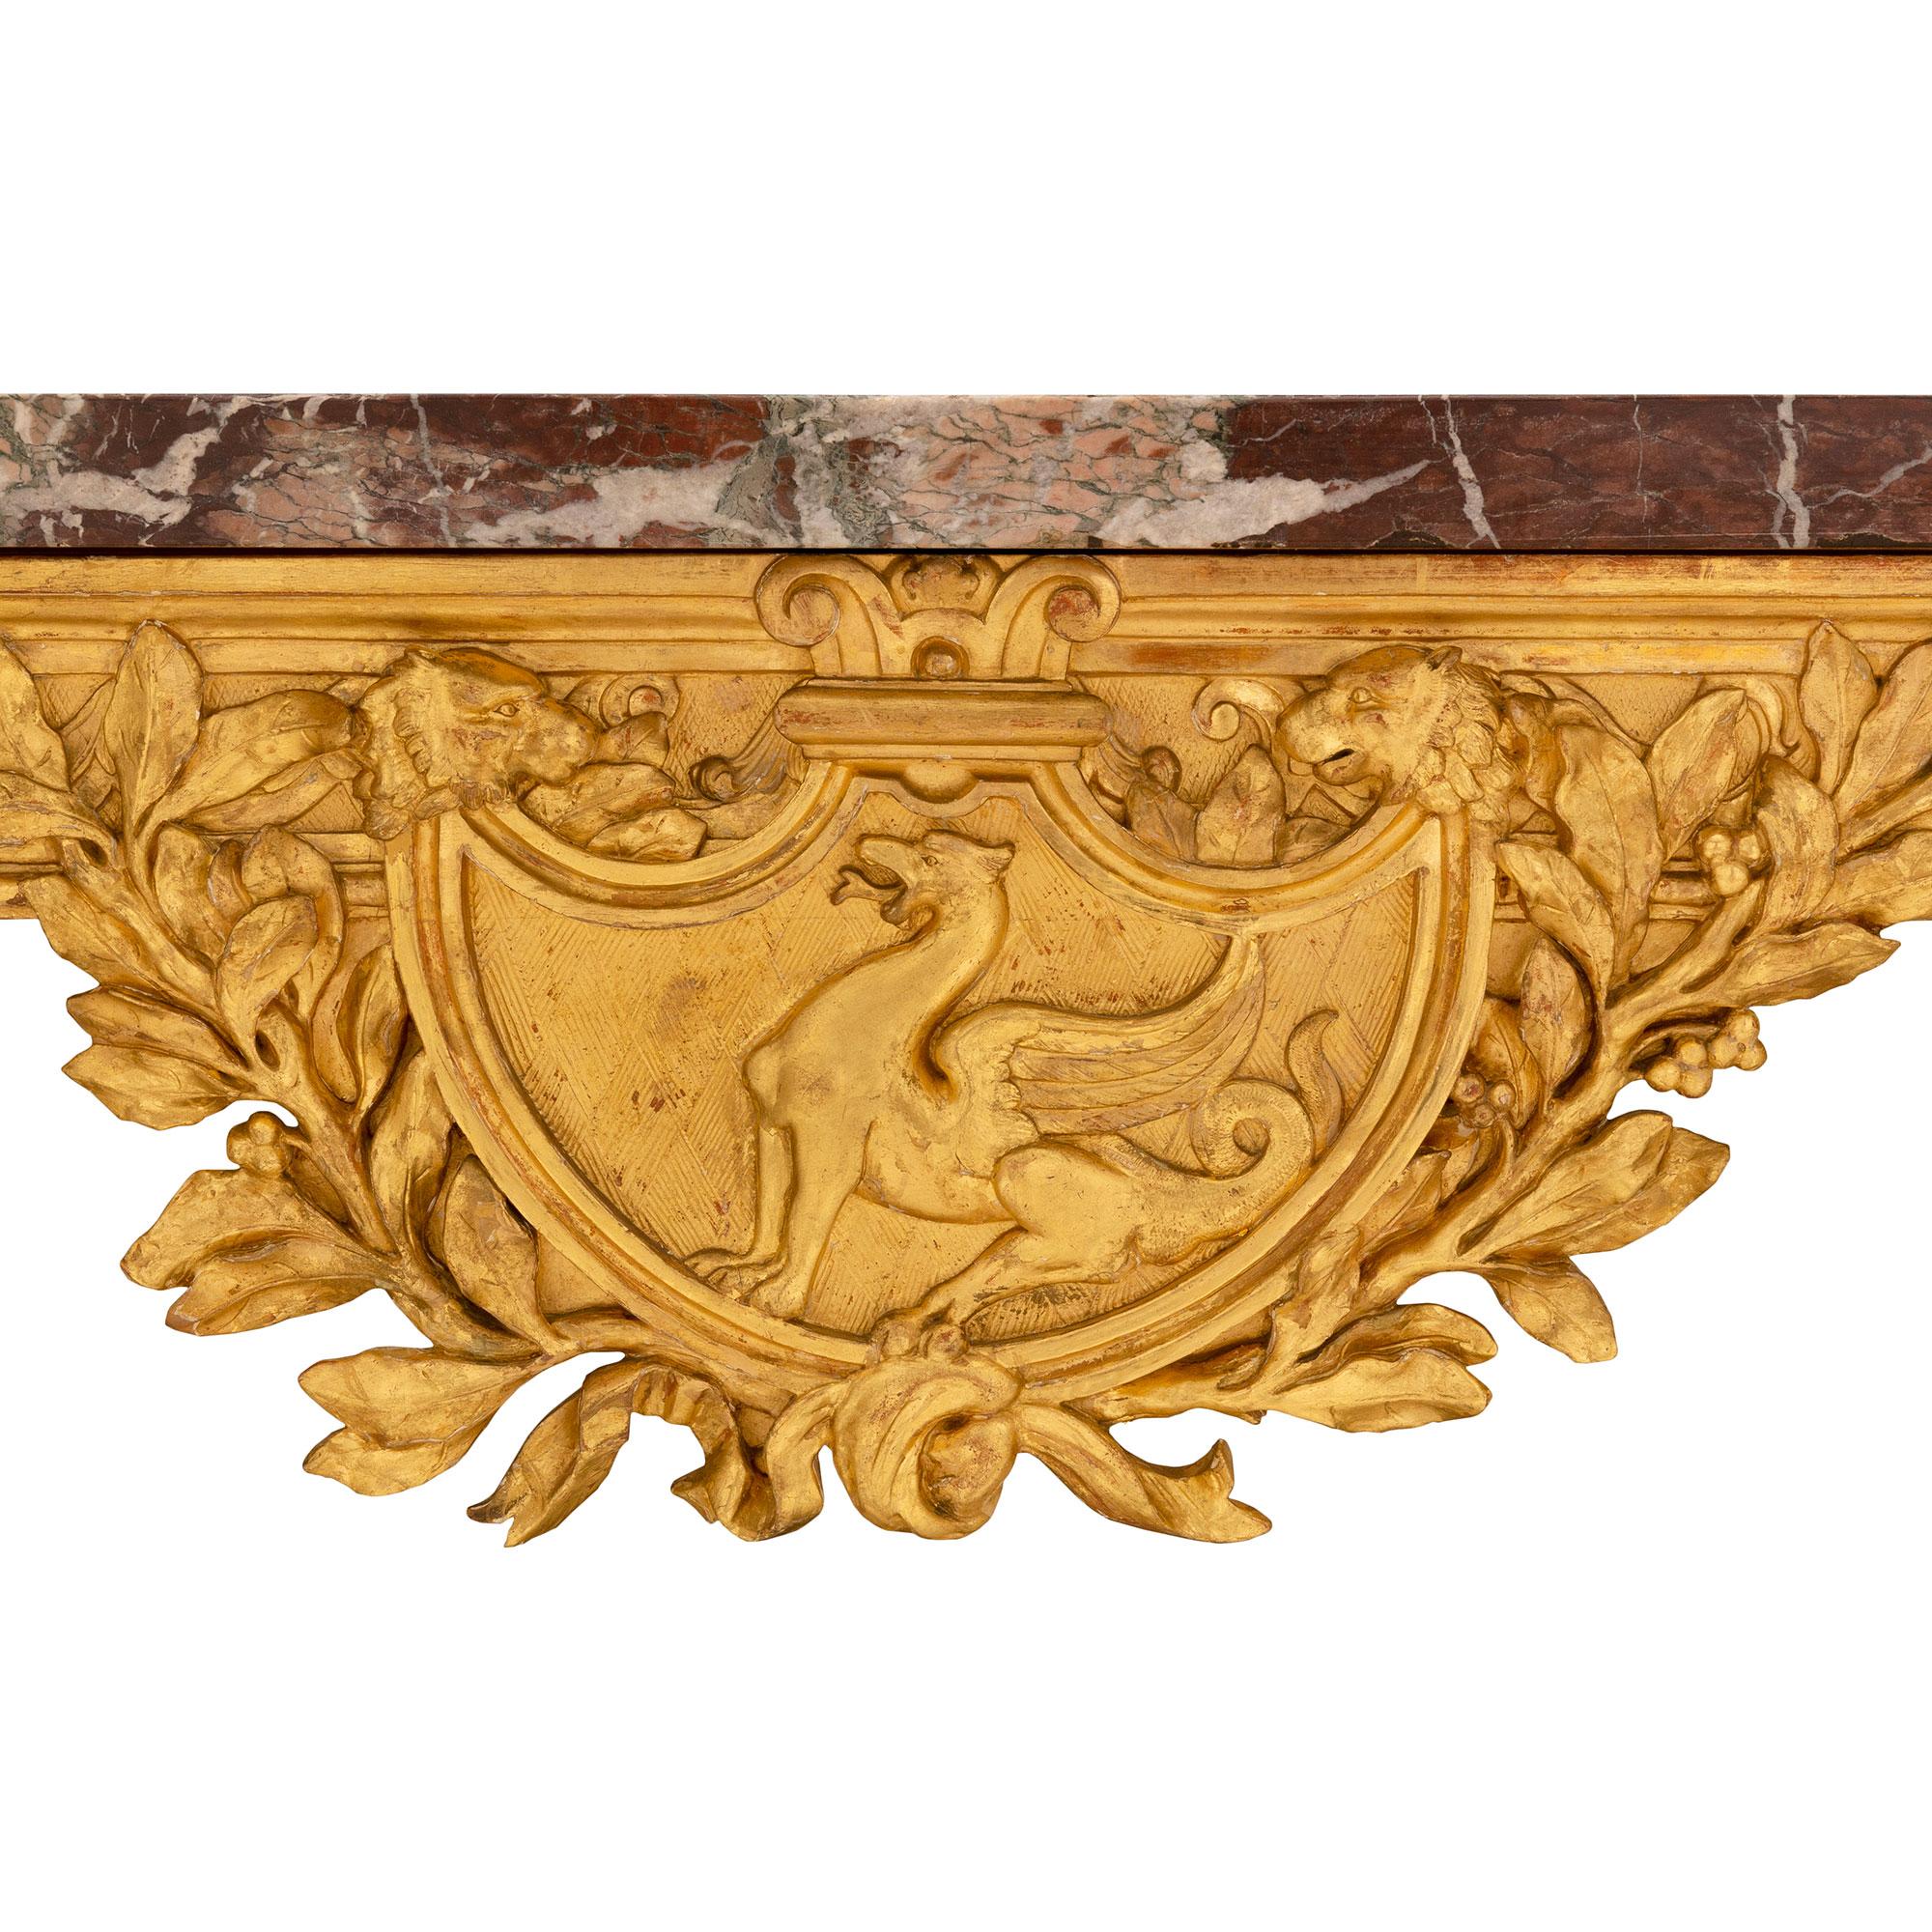 French Mid-19th Century Regence Style Giltwood and Marble Center Table For Sale 2